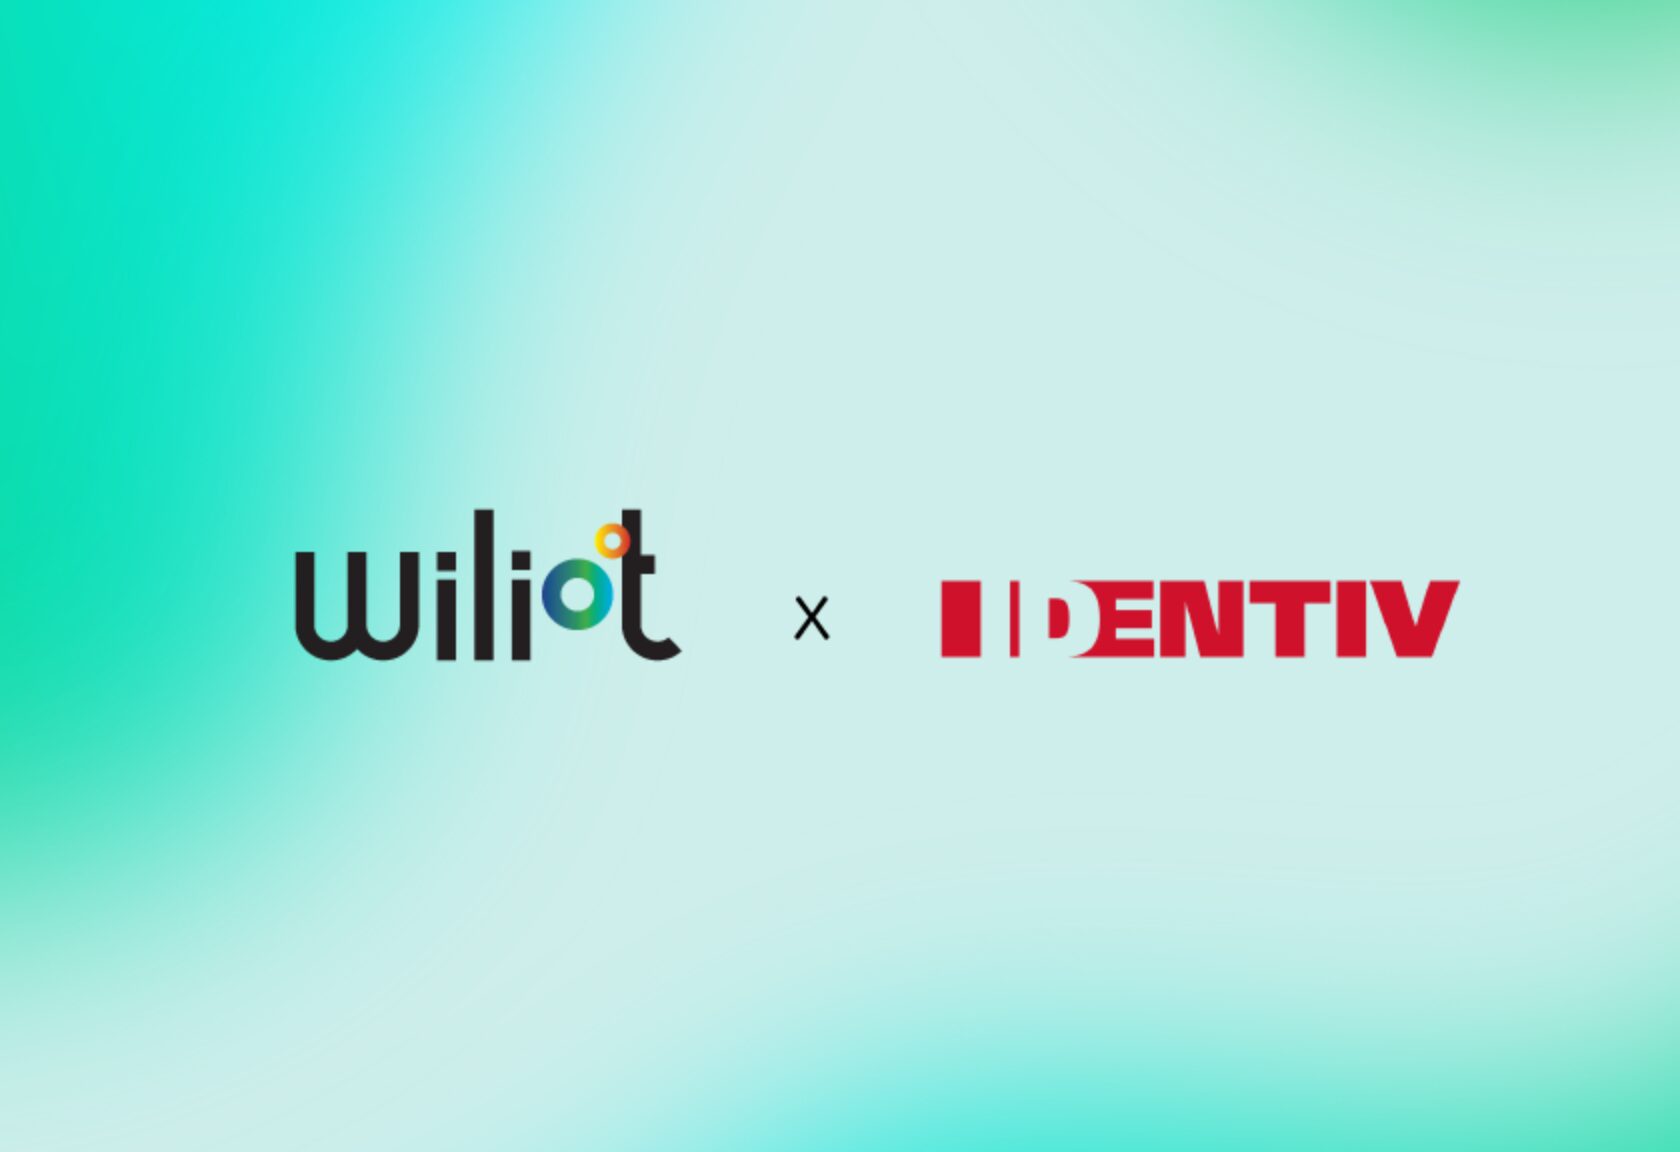 Wiliot Partners with Identiv to Manufacture Initial Order of 25 Million Units of its IoT Pixels Tags